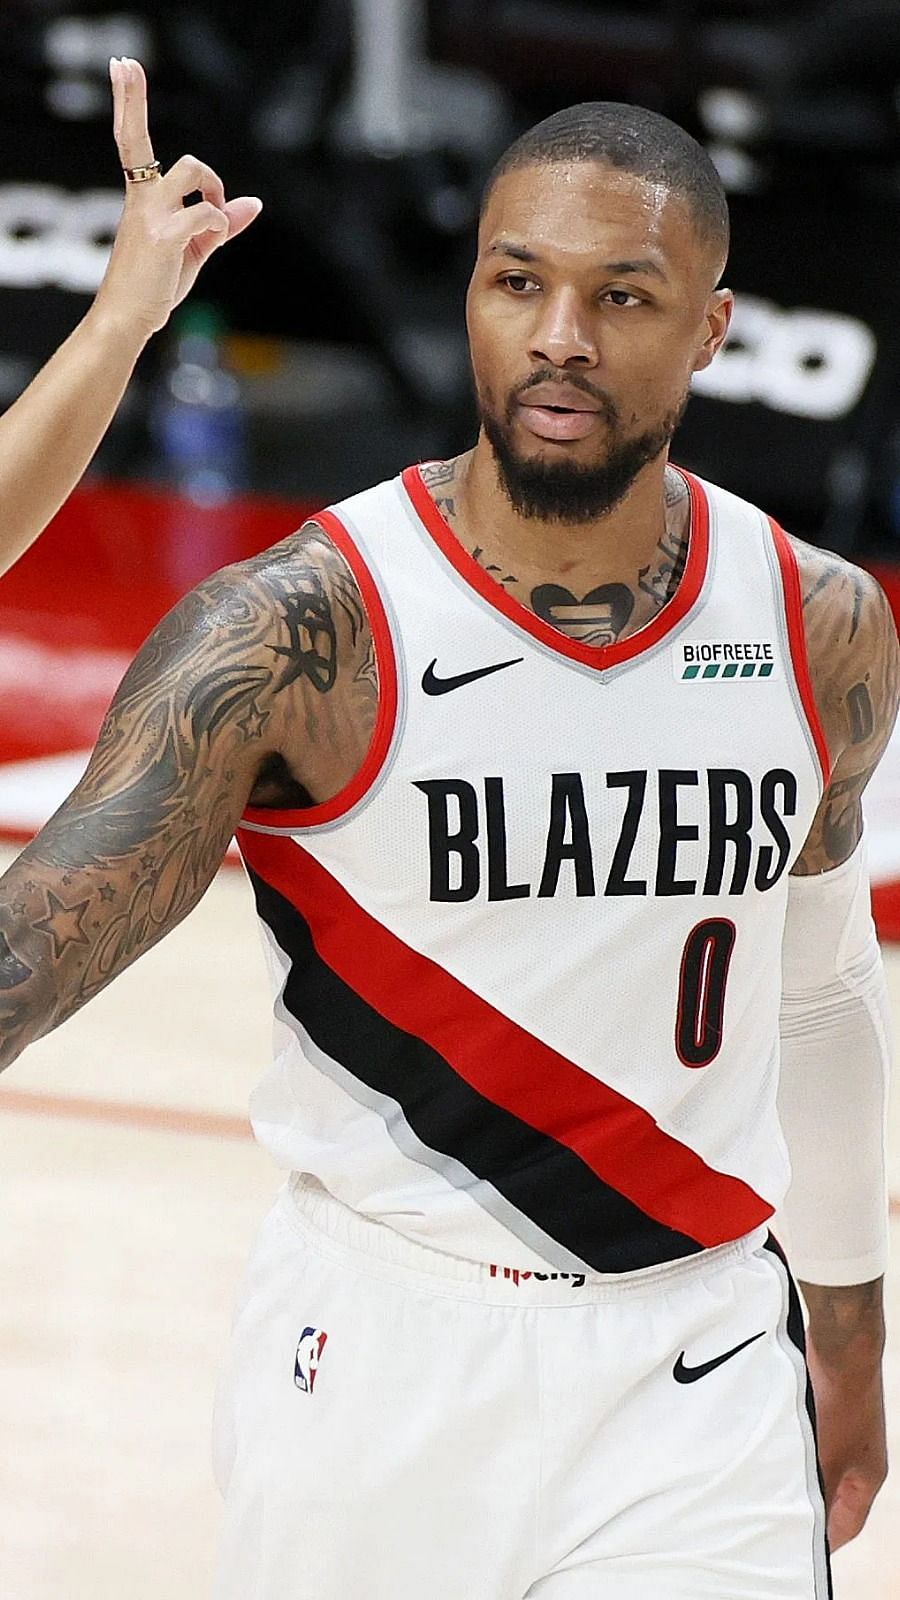 Portland Trail Blazers Vs Cleveland Cavaliers Injury Report Predicted Lineups And Starting 5s May 5th 2021 Nba Season 2020 21